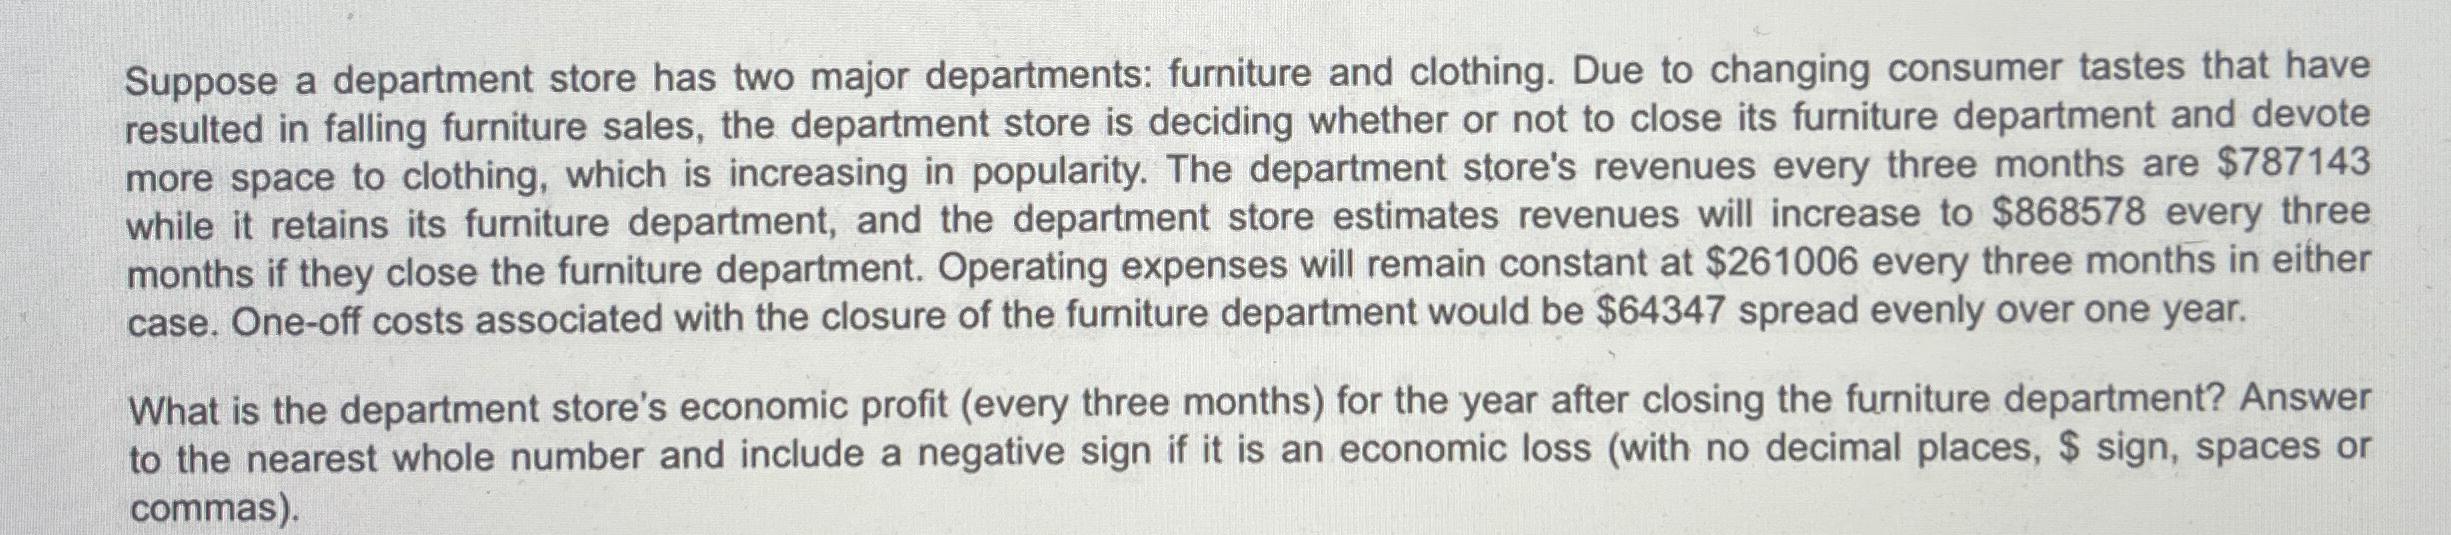 Suppose a department store has two major departments: furniture and clothing. Due to changing consumer tastes